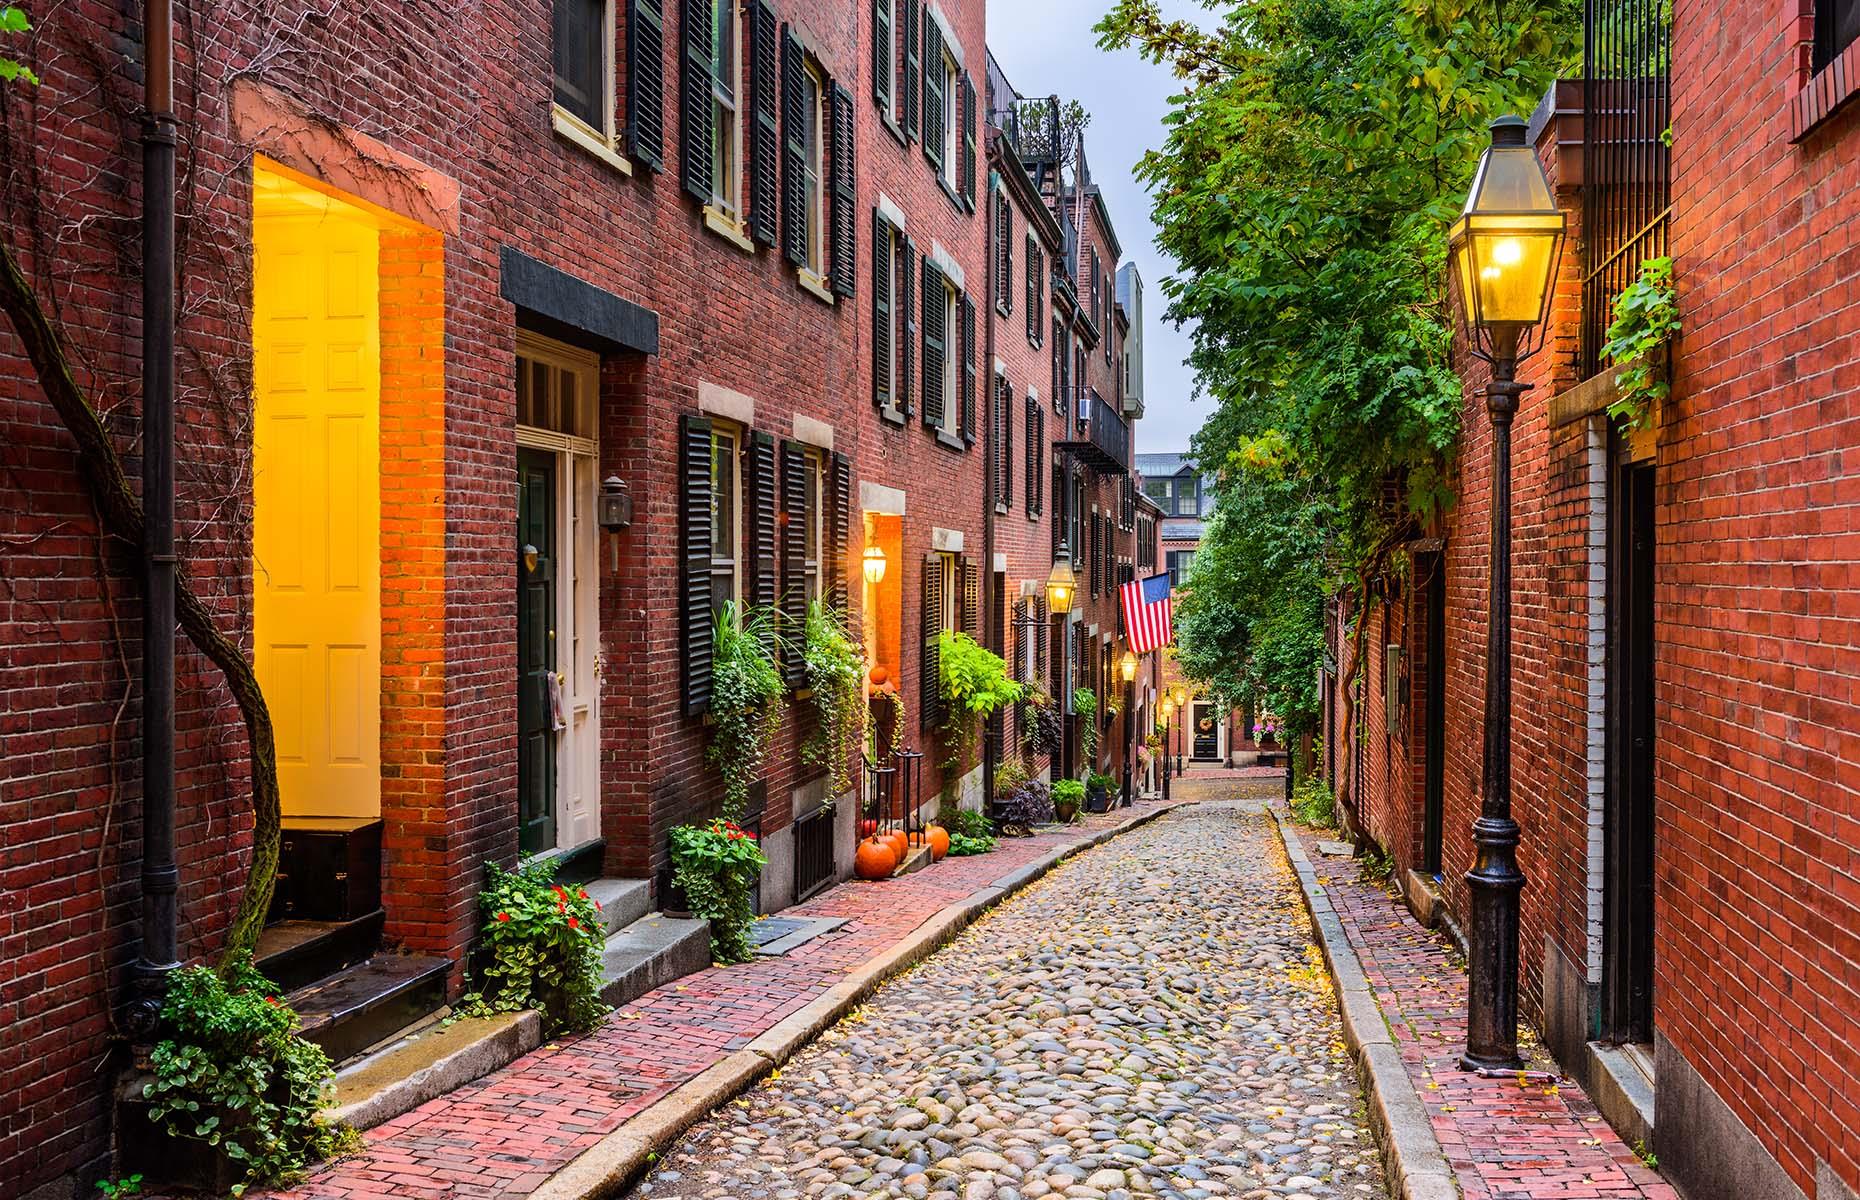 <p>Boston is brimming with incredible history and its buildings and streets definitely have a story or two to tell. This comprehensive two-hour tour takes in sights such as the historic Custom House Tower, the Old City Hall and the famous streets of Beacon Hill (pictured). Prices <a href="https://www.airbnb.com/experiences/1033922?irgwc=1&irclid=0wm12rU21zryRz-X29x6O1wtUkBX5J1SwzlPU00&ircid=5503&sharedid=lovemoney.com&iratid=12347&c=.pi73.pk5503_10078&af=10078&iradid=378143">start from around $36</a> per person.</p>  <p><a href="https://www.loveexploring.com/galleries/108377/americas-most-beautiful-streets?page=1"><strong>Here are more of America's most beautiful streets</strong></a></p>